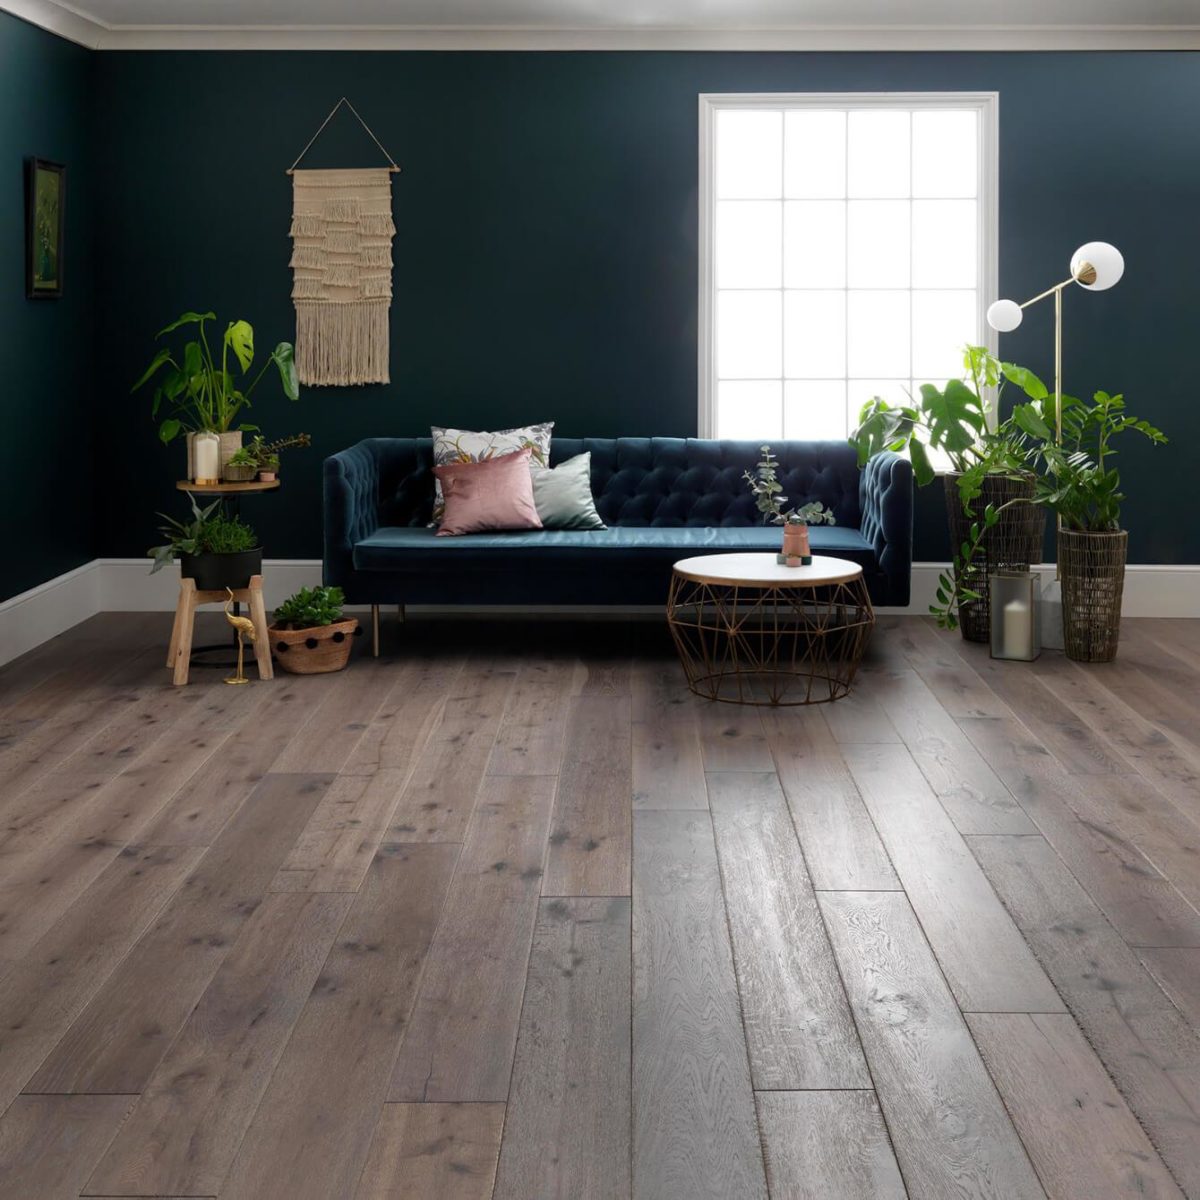 Give your home the look it deserves with Woodpecker flooring